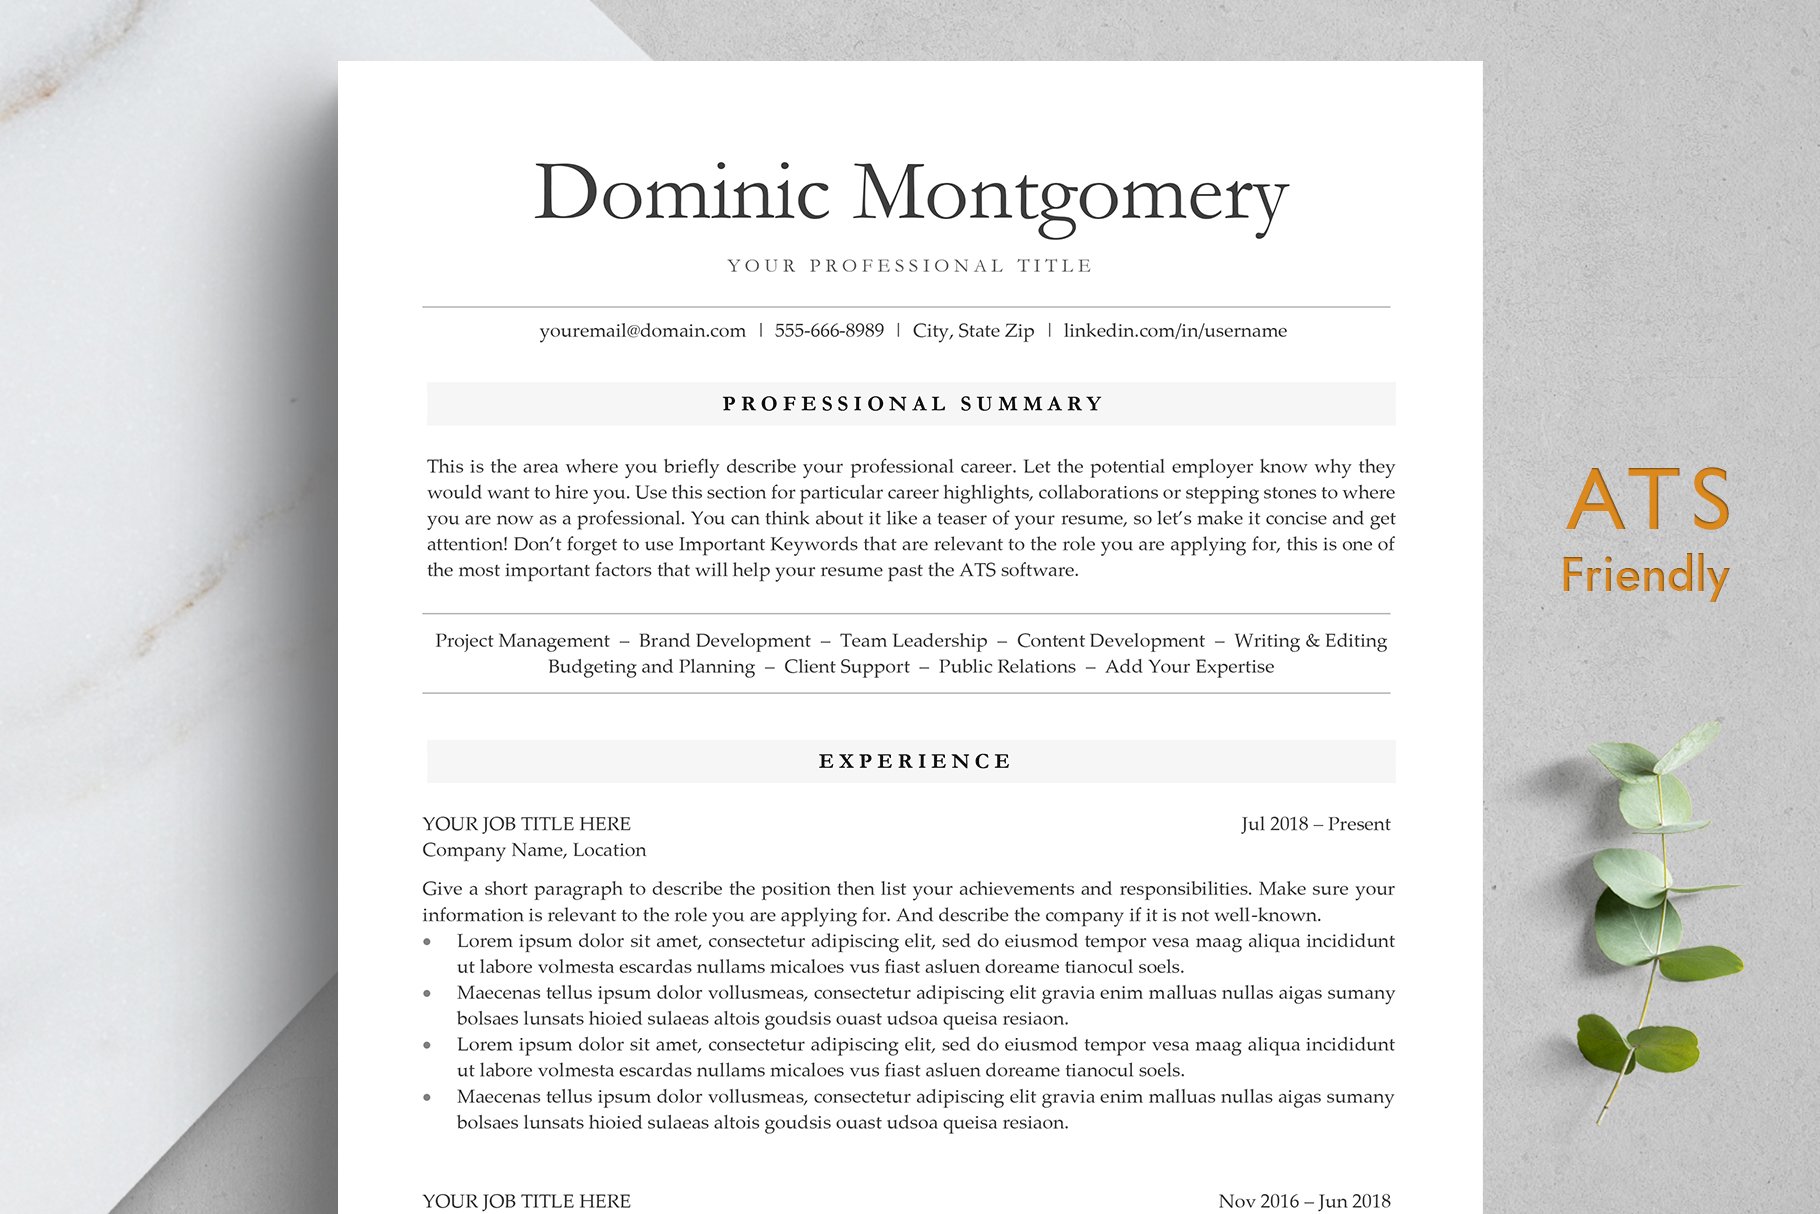 ATS Resume Template - DOMINIC cover image.